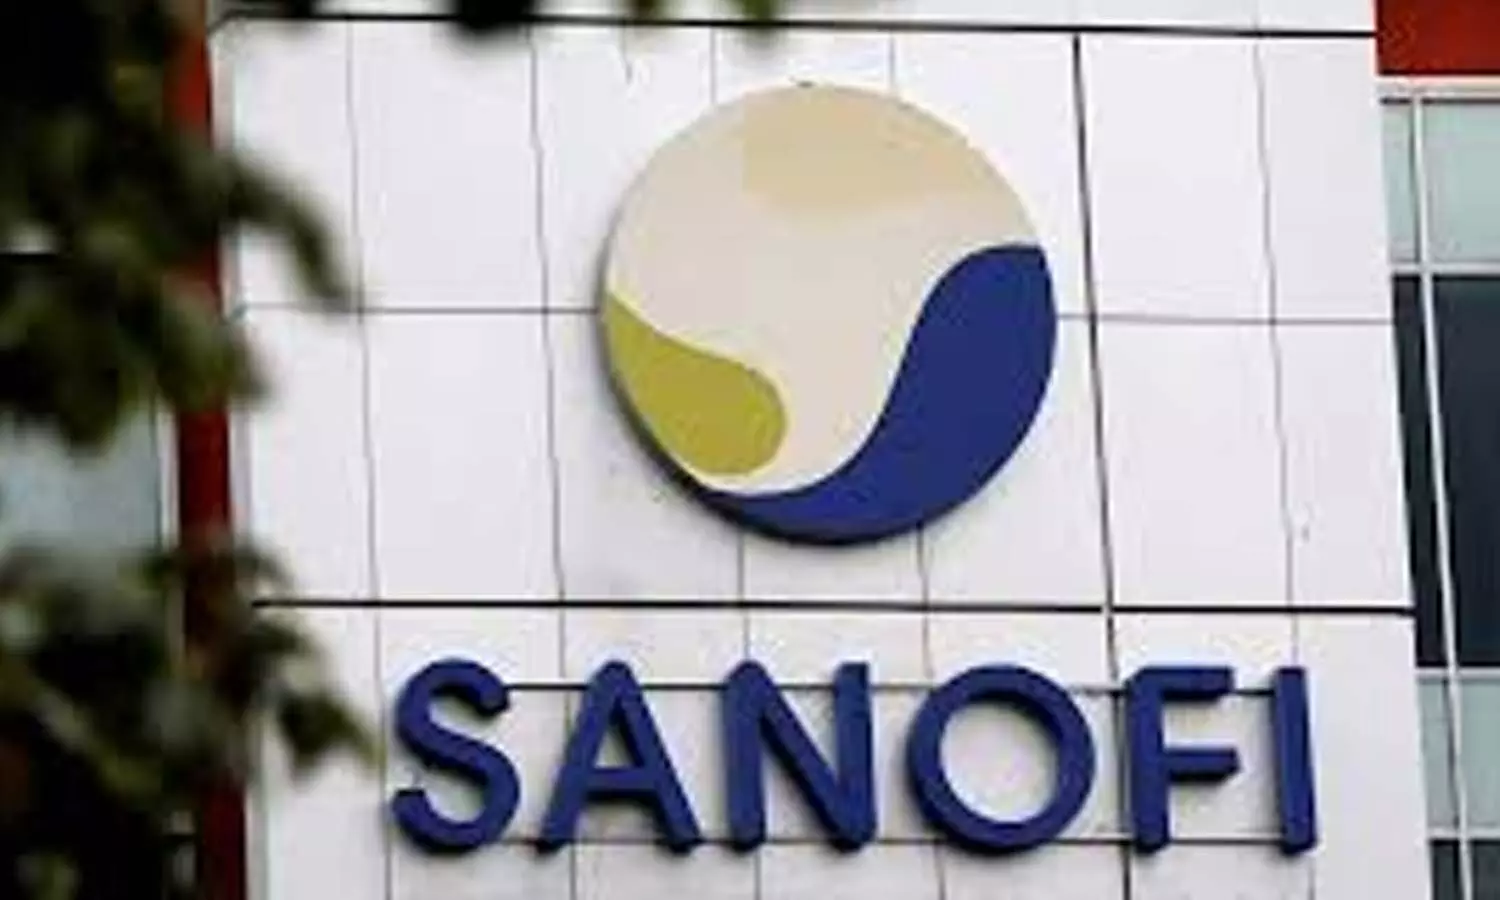 Sanofi plans to sell its equity investment in Regeneron; confirms no change to ongoing collaboration